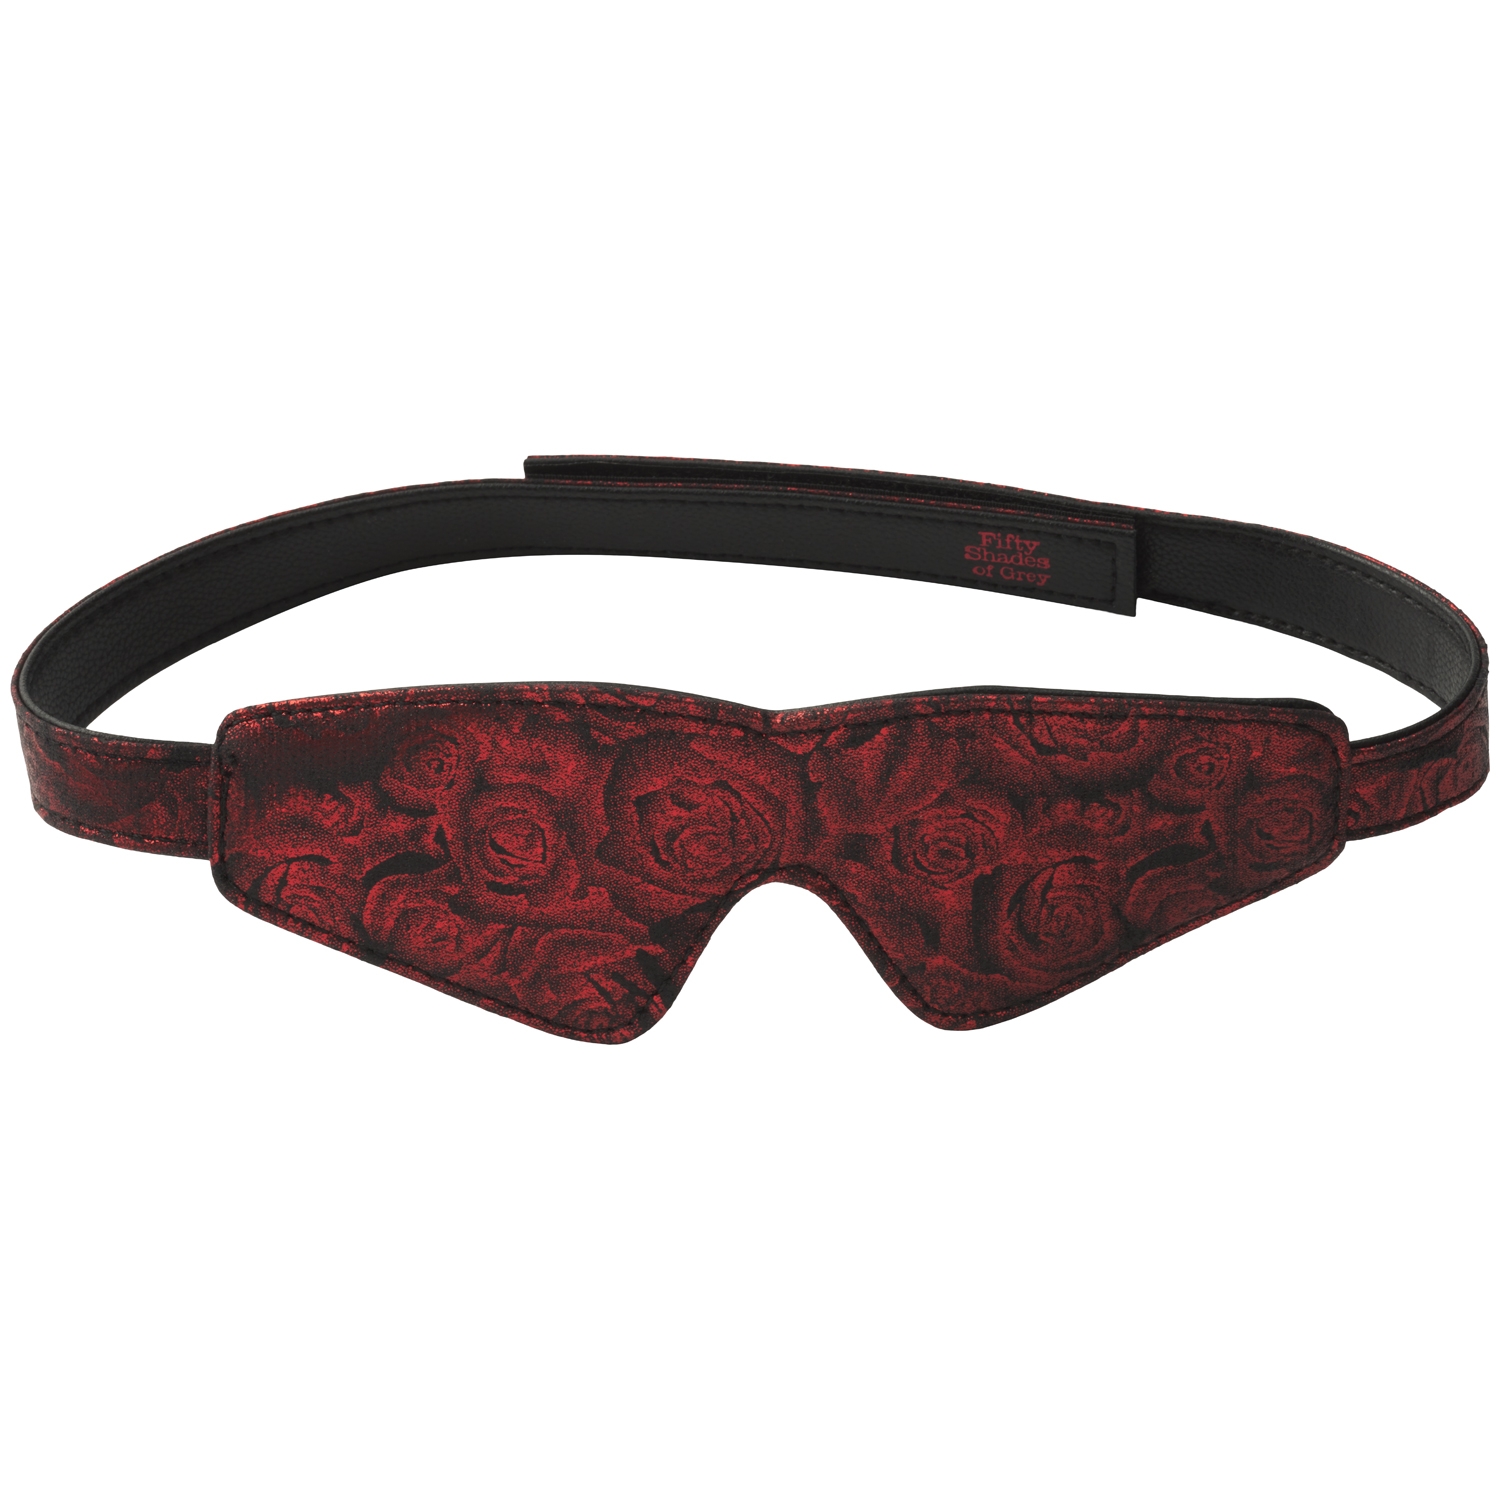 Fifty Shades of Grey Sweet Anticipation Blindfold - Red